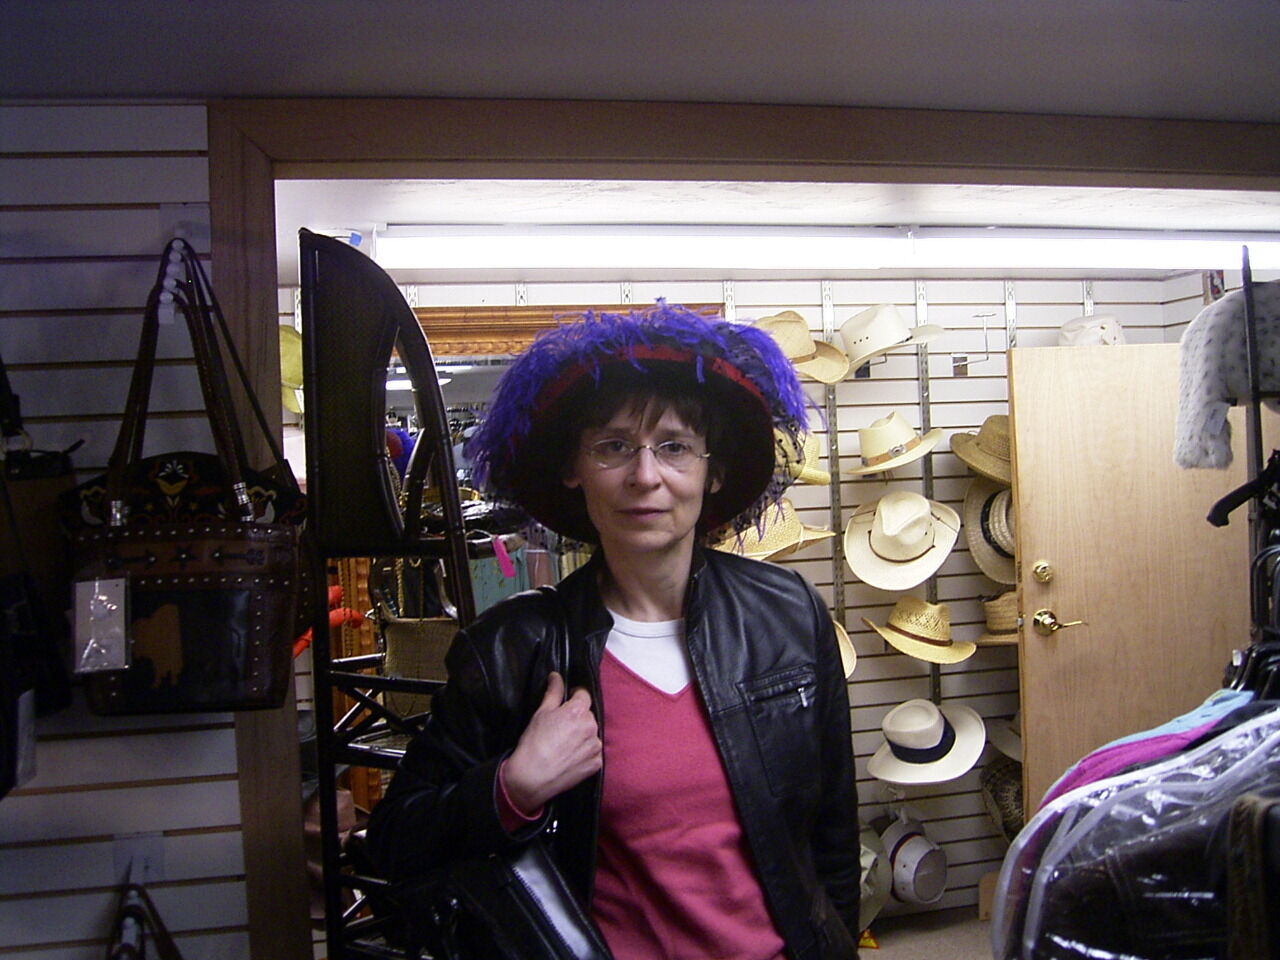 A person in a black leather jacket and pink shirt stands indoors wearing a large purple and blue decorative hat, with various hats displayed on the shelves behind them.